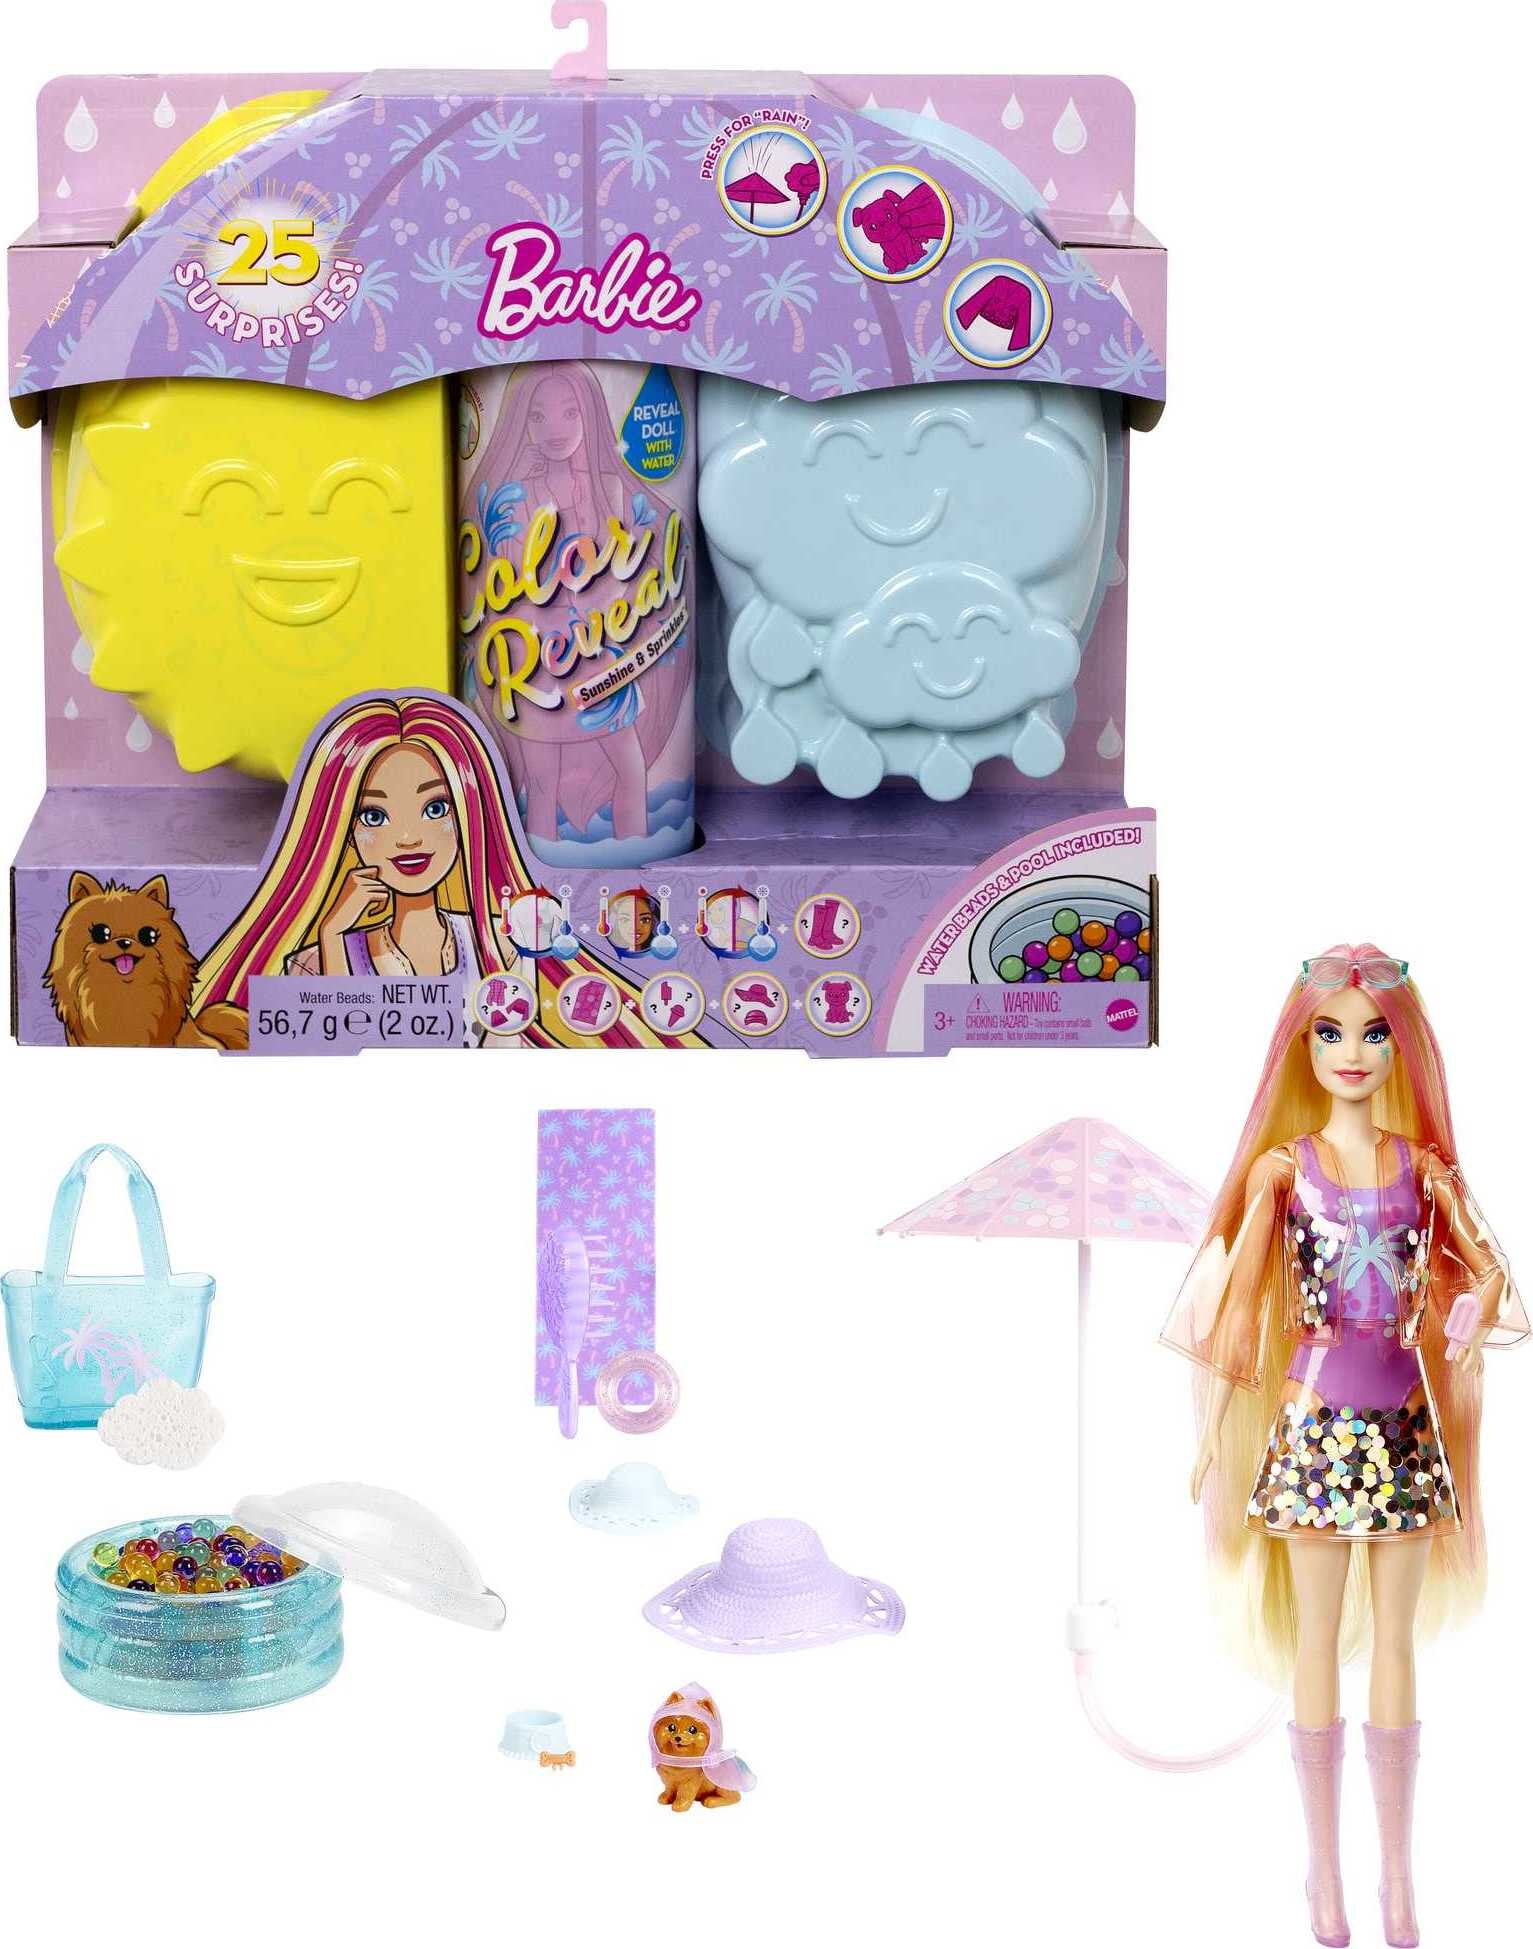 Barbie Color Reveal Doll, Palm Trees Series with 7 Surpises, Color-Change Transformation